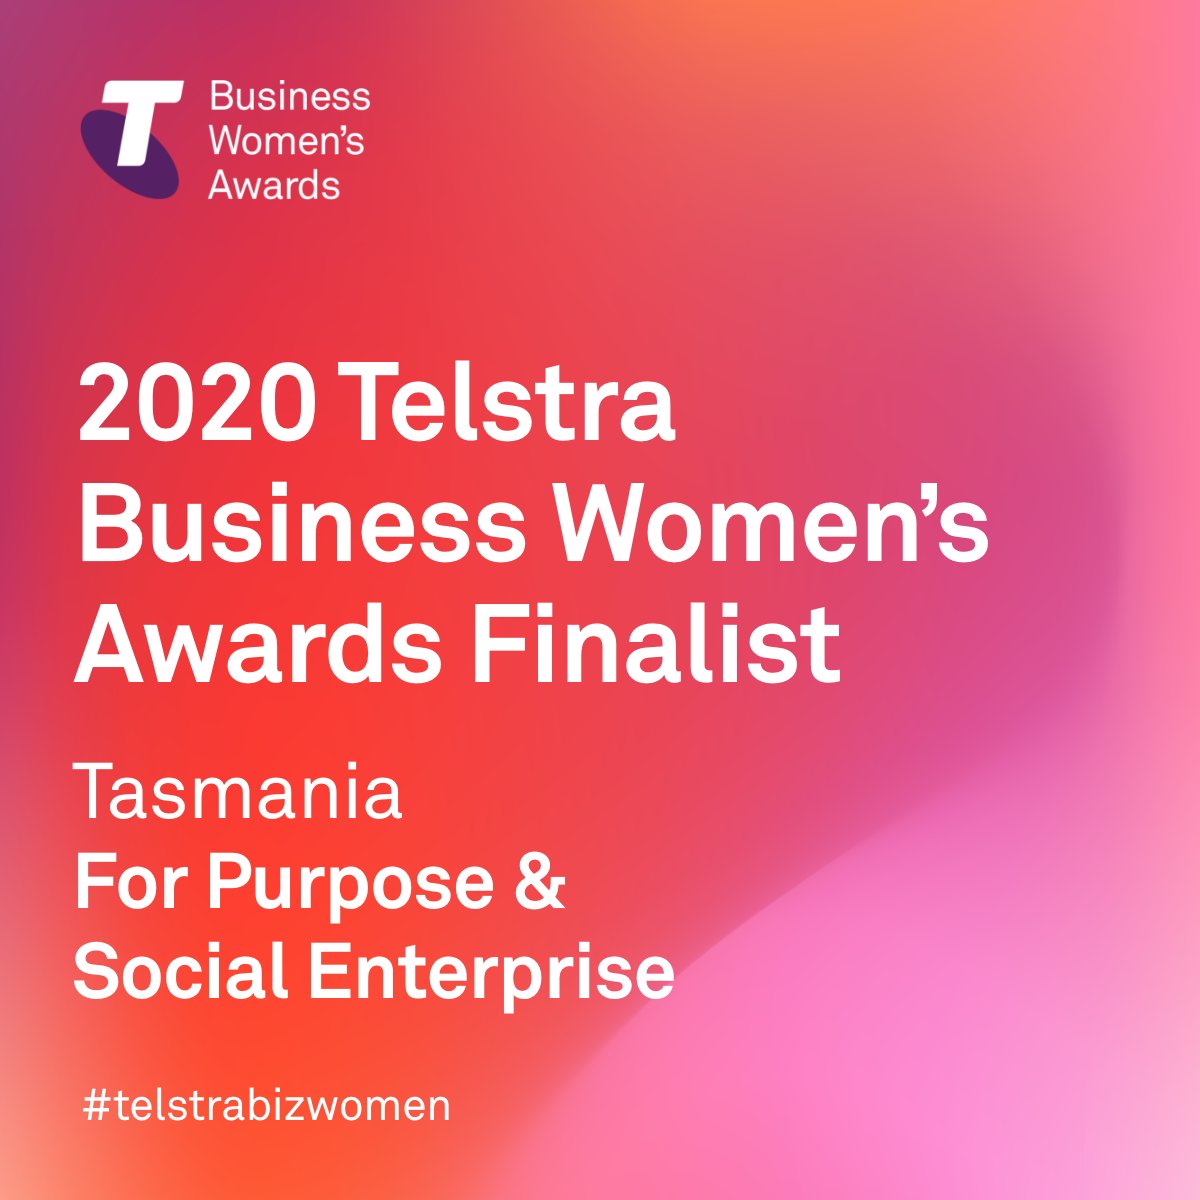 Humbled to have been named a Tasmanian finalist in the Telstra Business Women's Awards in the For Purpose/Social Enterprise category. Looking forward to meeting some other wonderful women! #telstrabizwomen #letstalkaboutdrugs #advocacy  #pilltesting